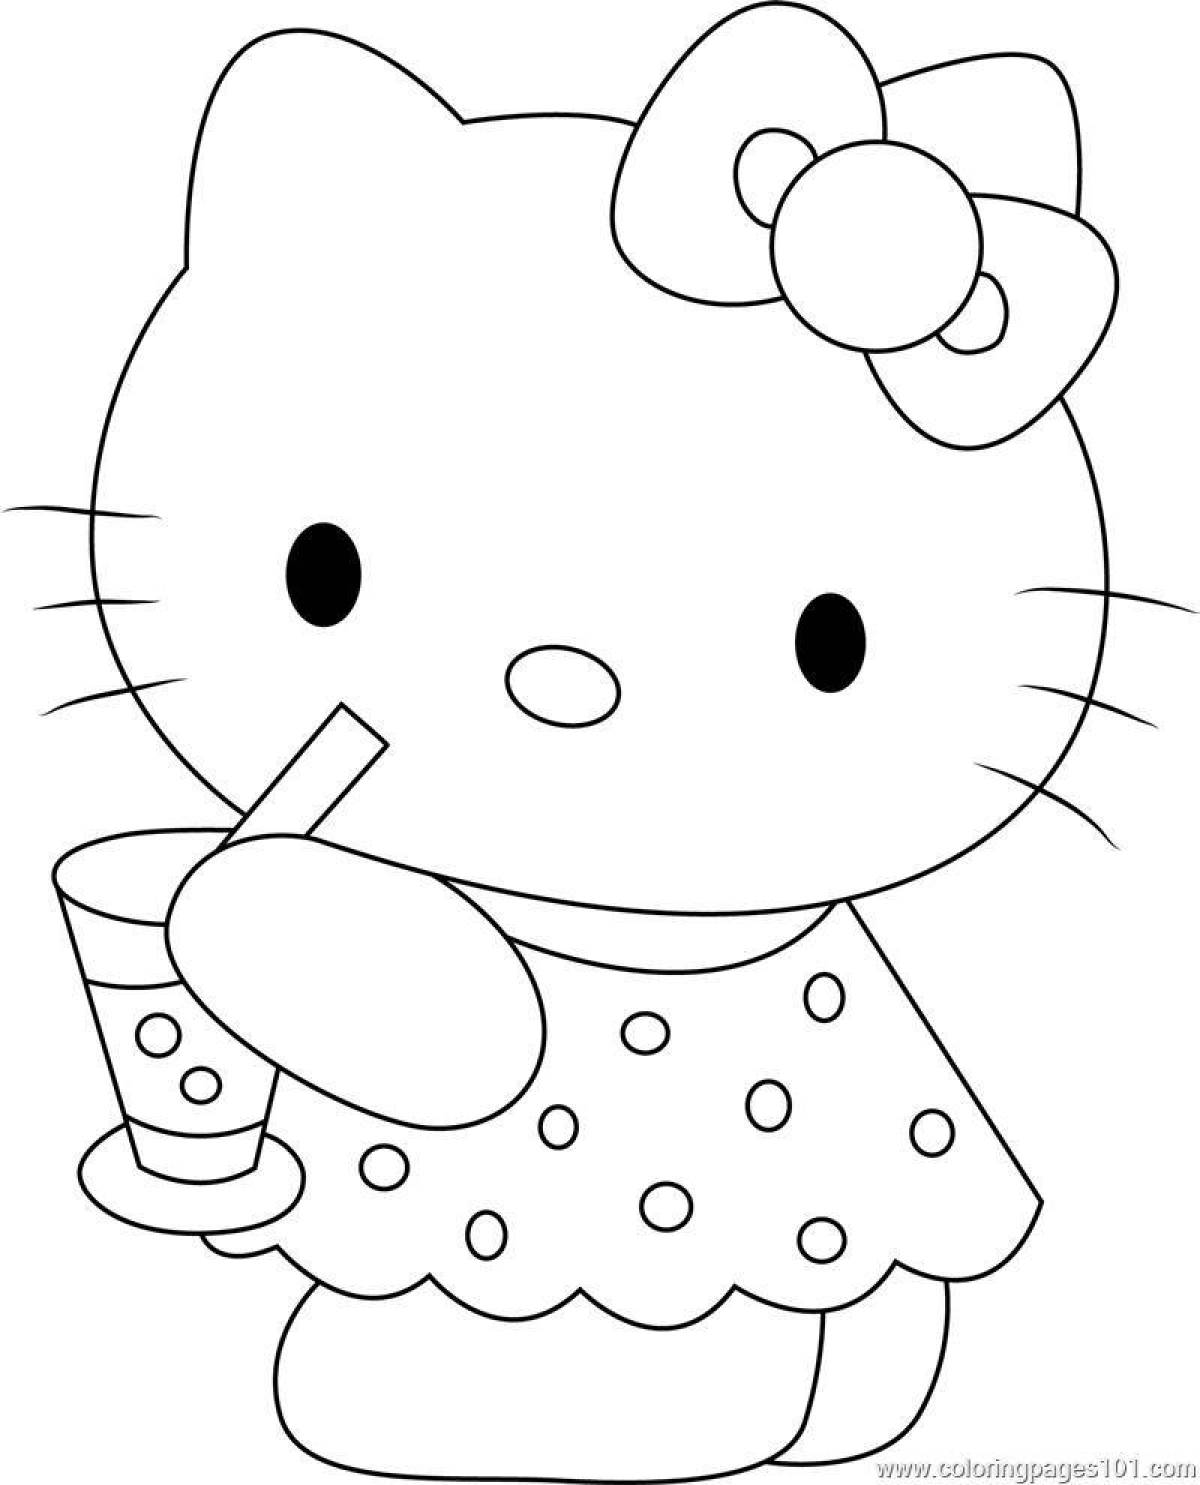 Shiny hello kitty regular without bow and clothes